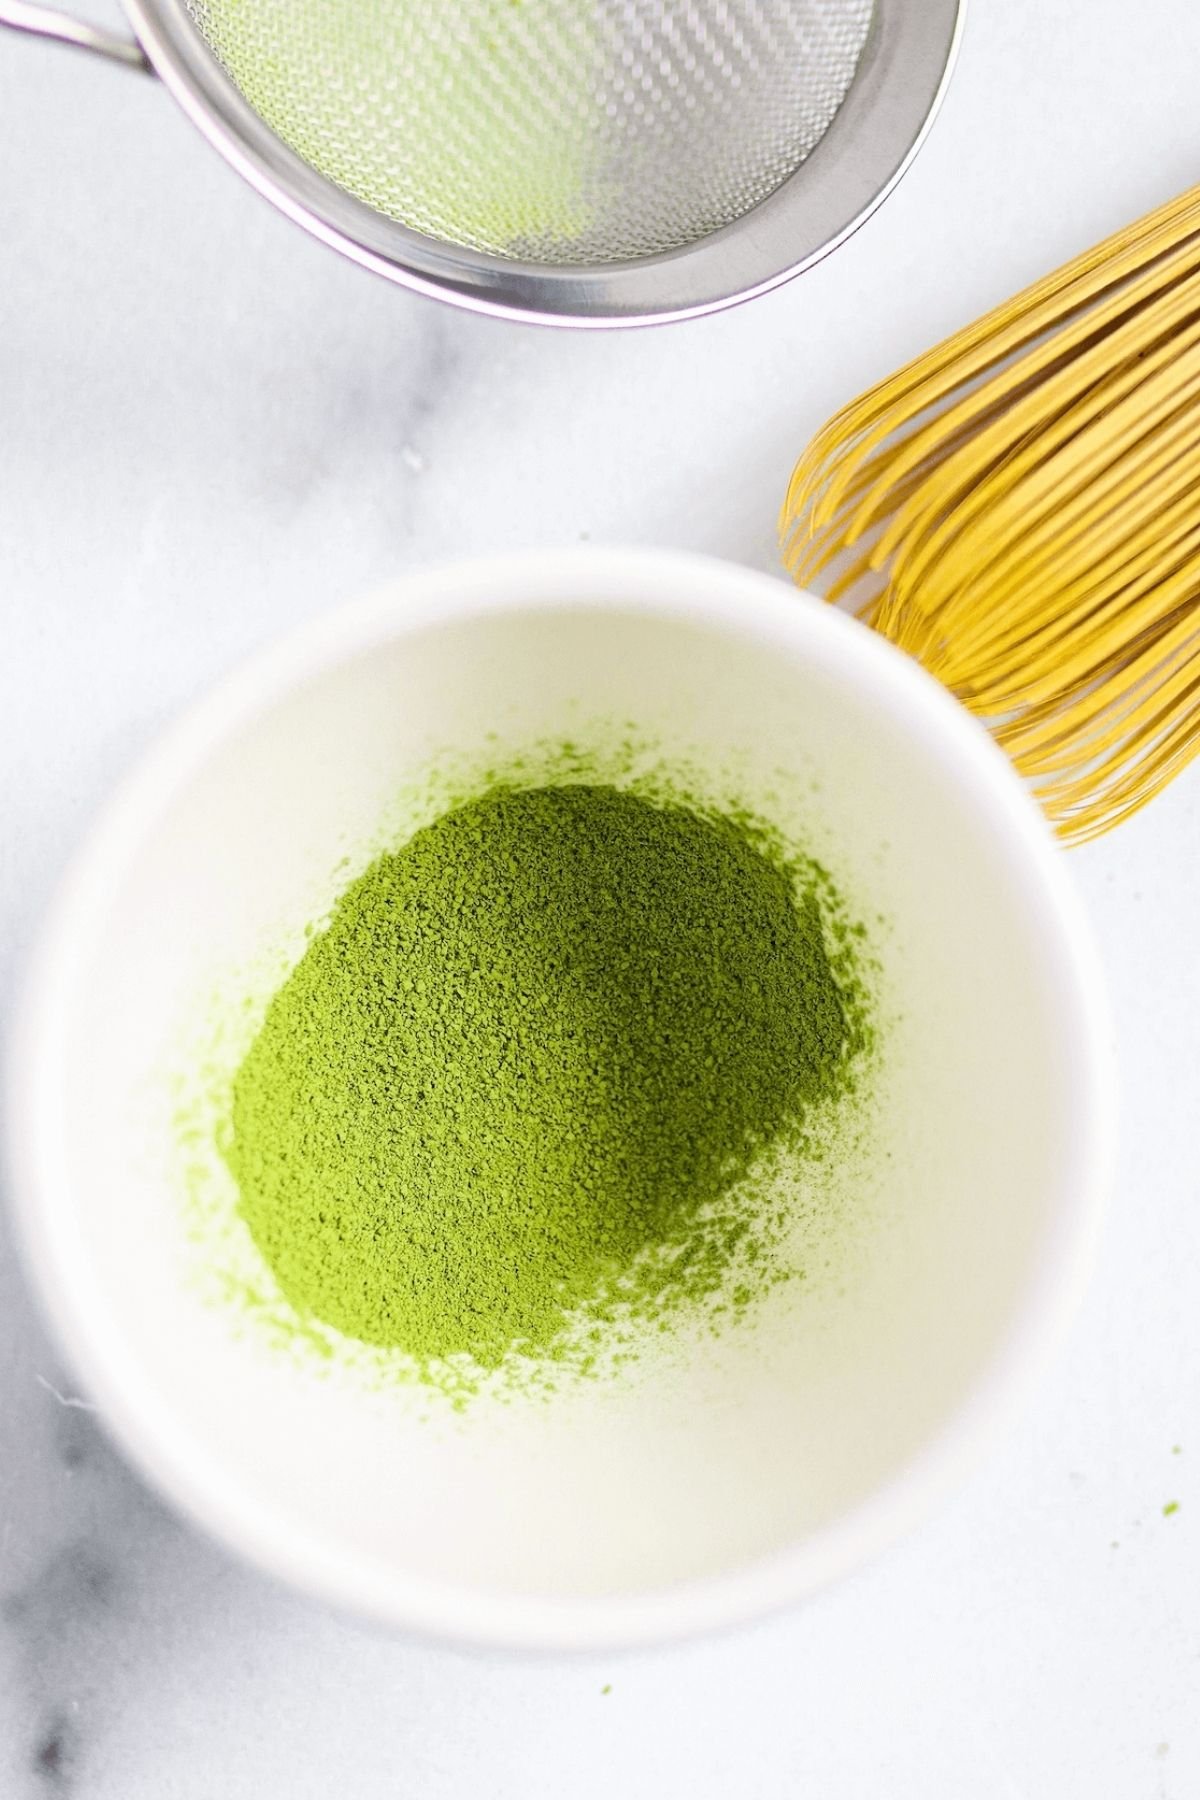 sifted matcha in a bowl.